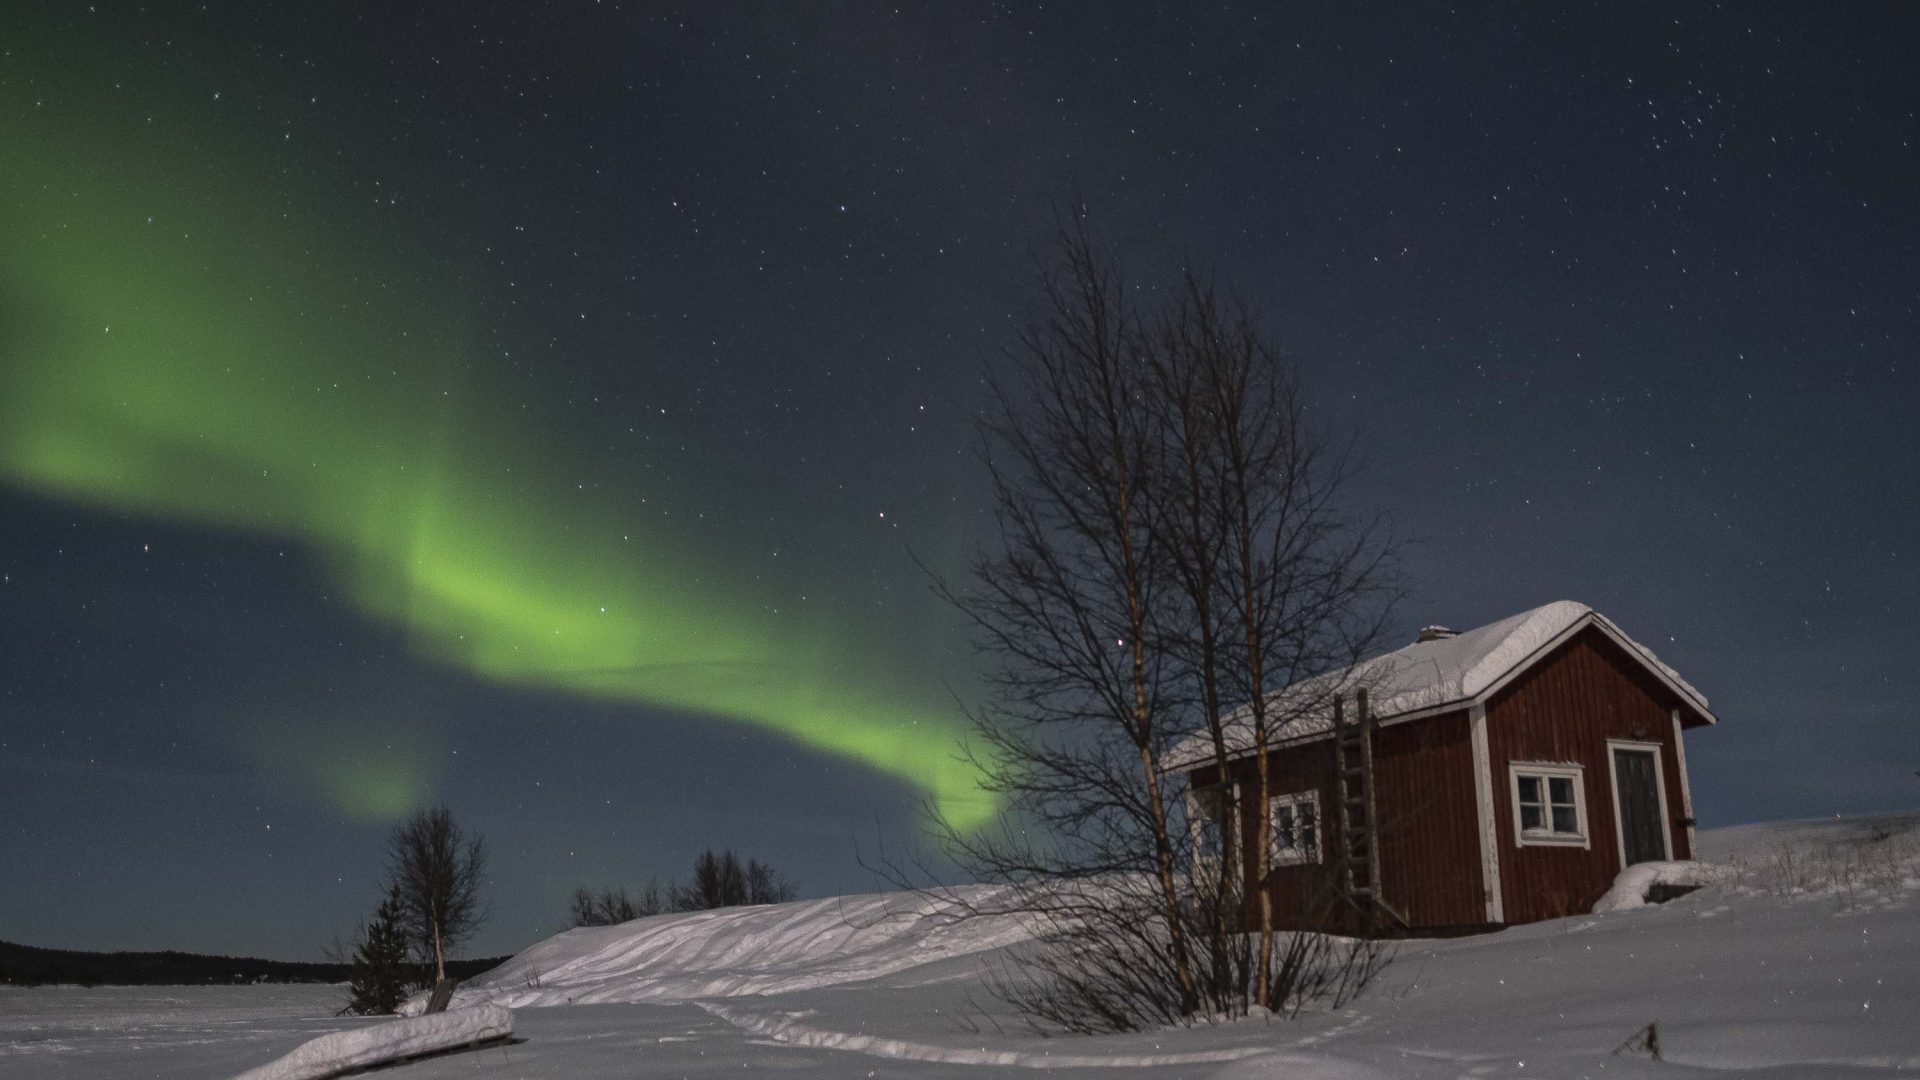 Green Northern Lights over a wooden house.